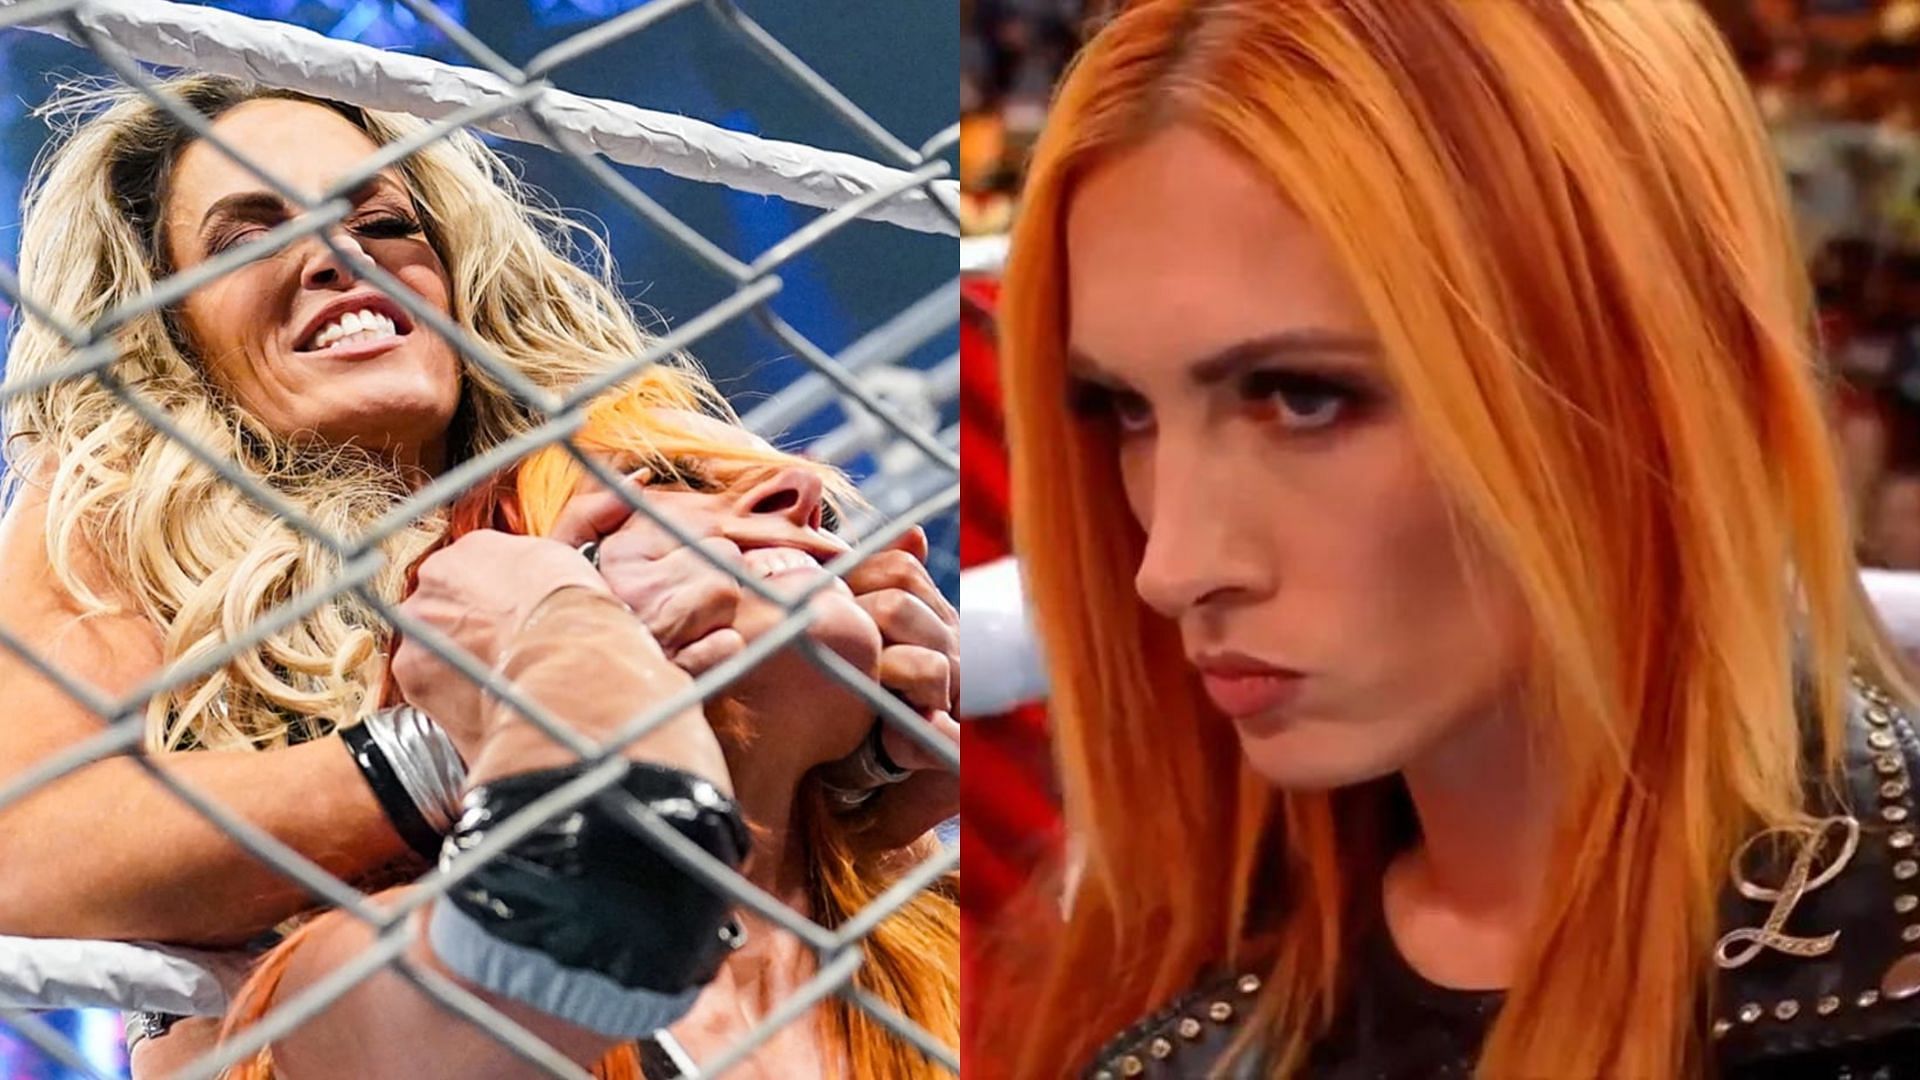 Trish Stratus and Becky Lynch ended their rivalry at Payback